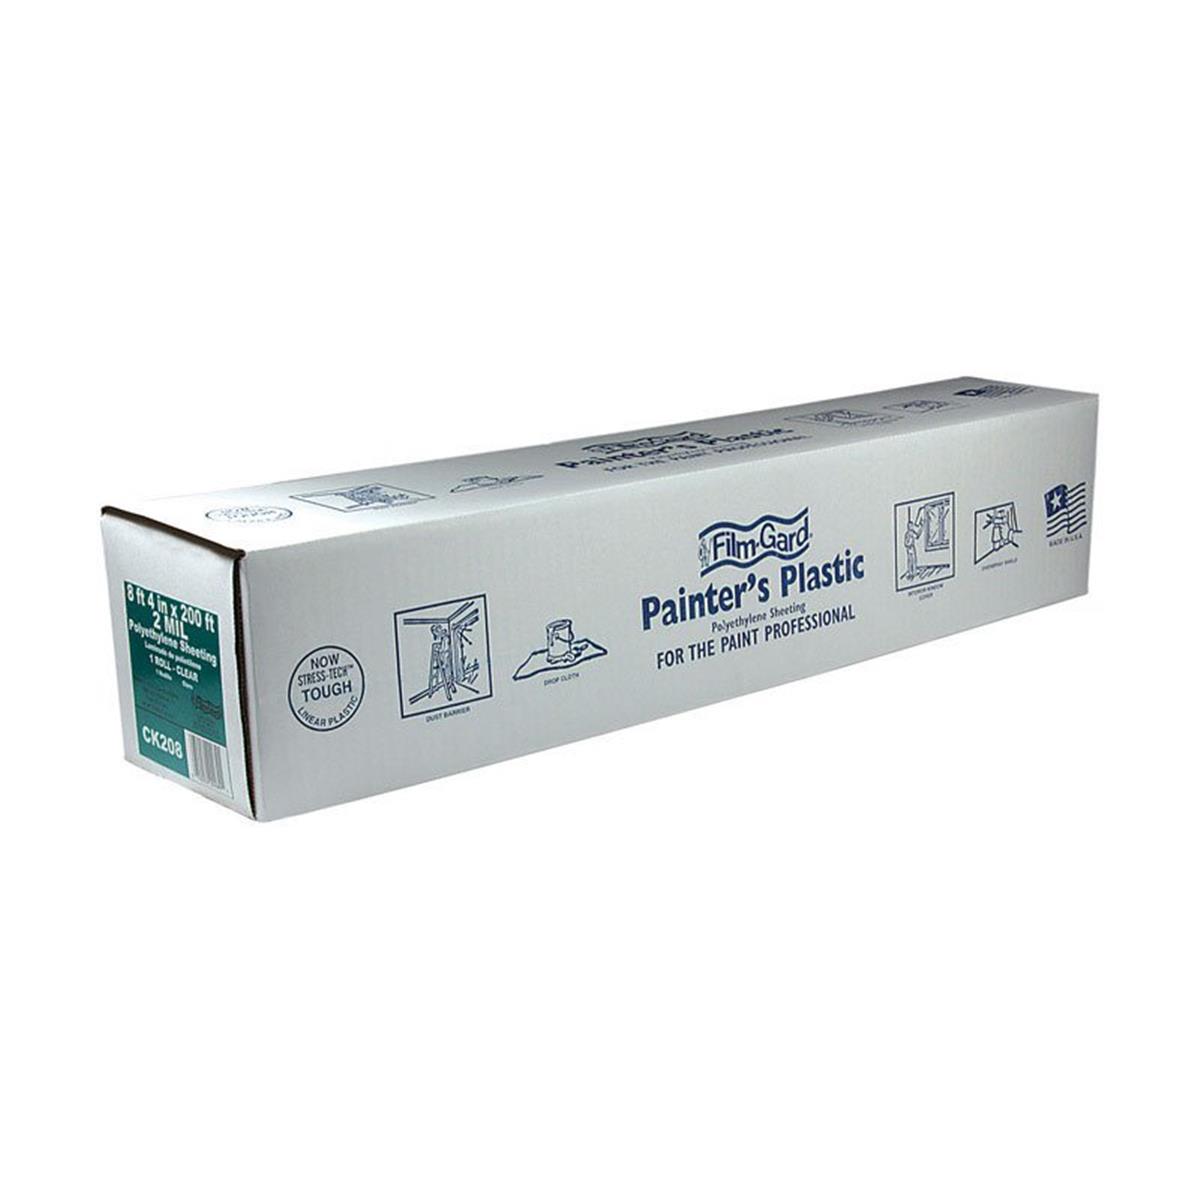 Picture of Berry plastics 625809 8 ft. 4 in. x 200 ft. 2 Mil Clear Multi-Purpose Poly Sheet